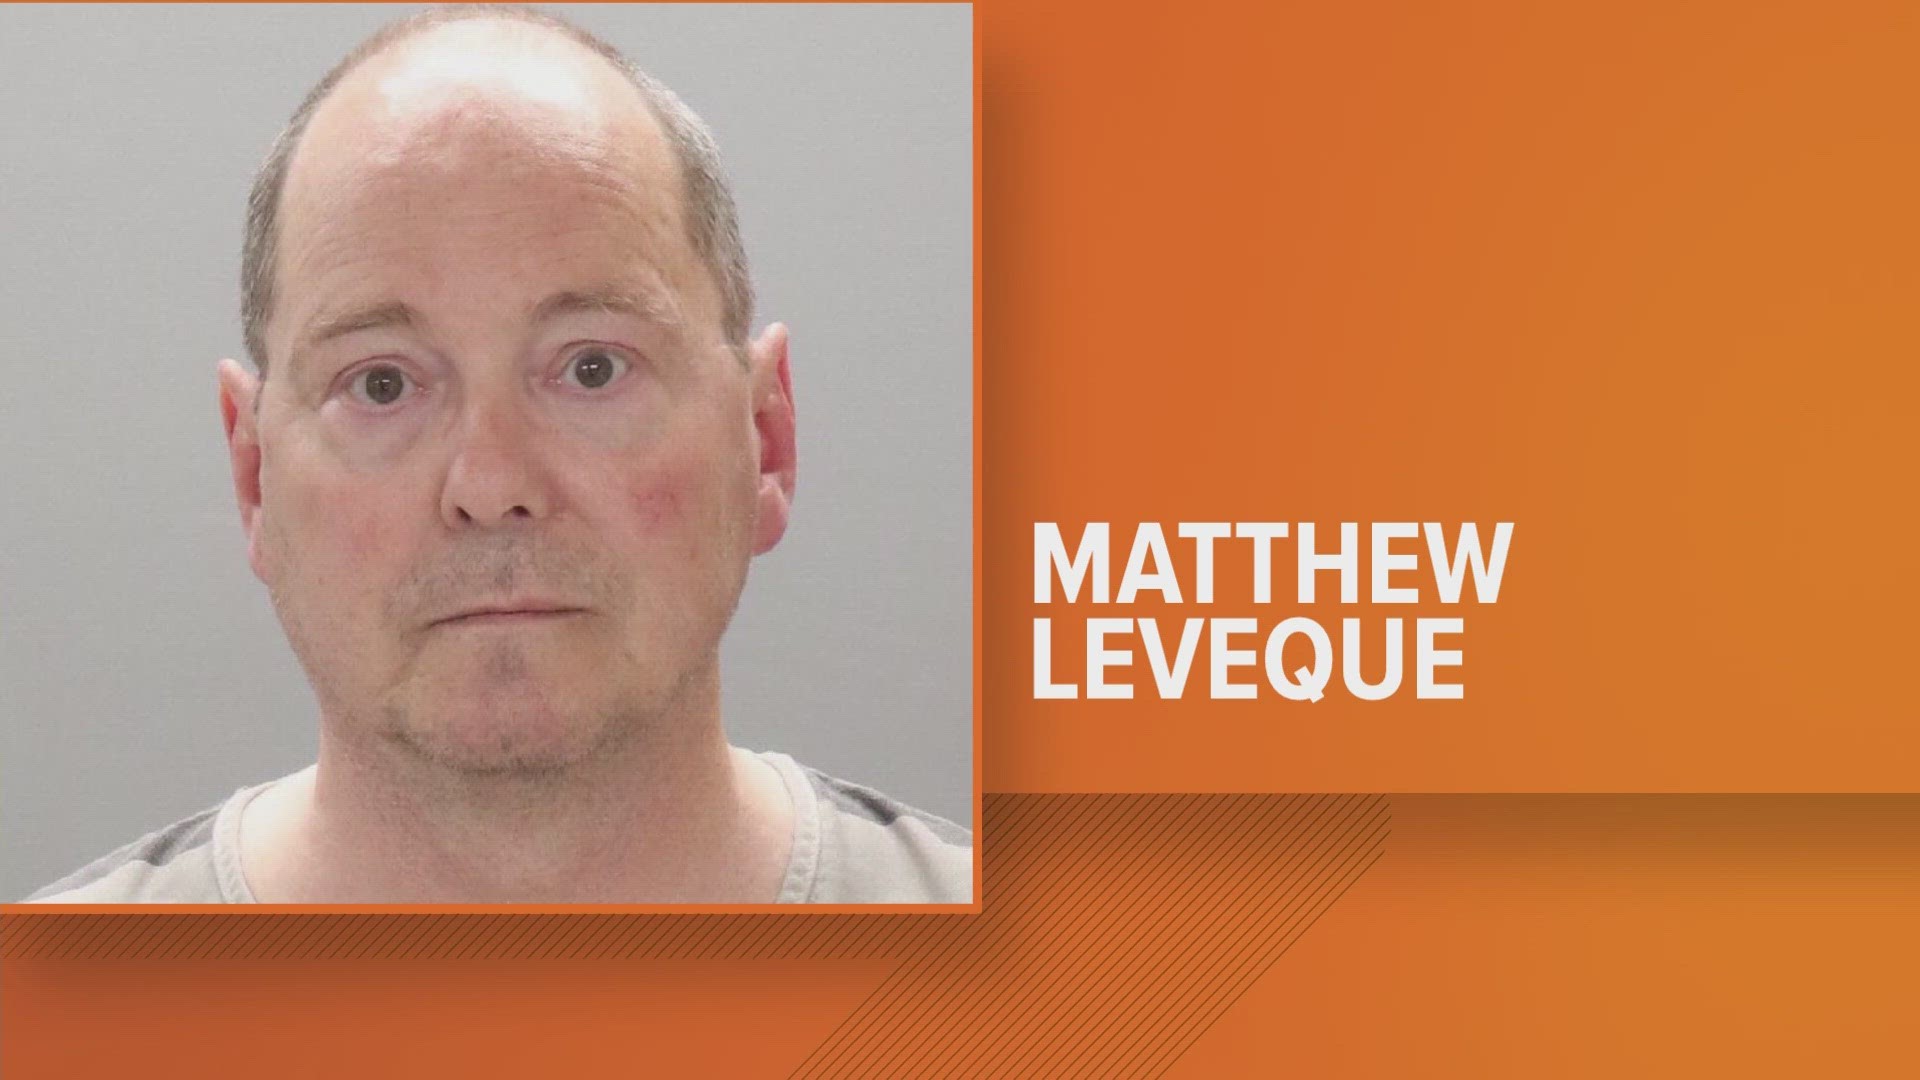 Matthew Leveque, a 63-year-old, was arrested Thursday at Holston Middle School.